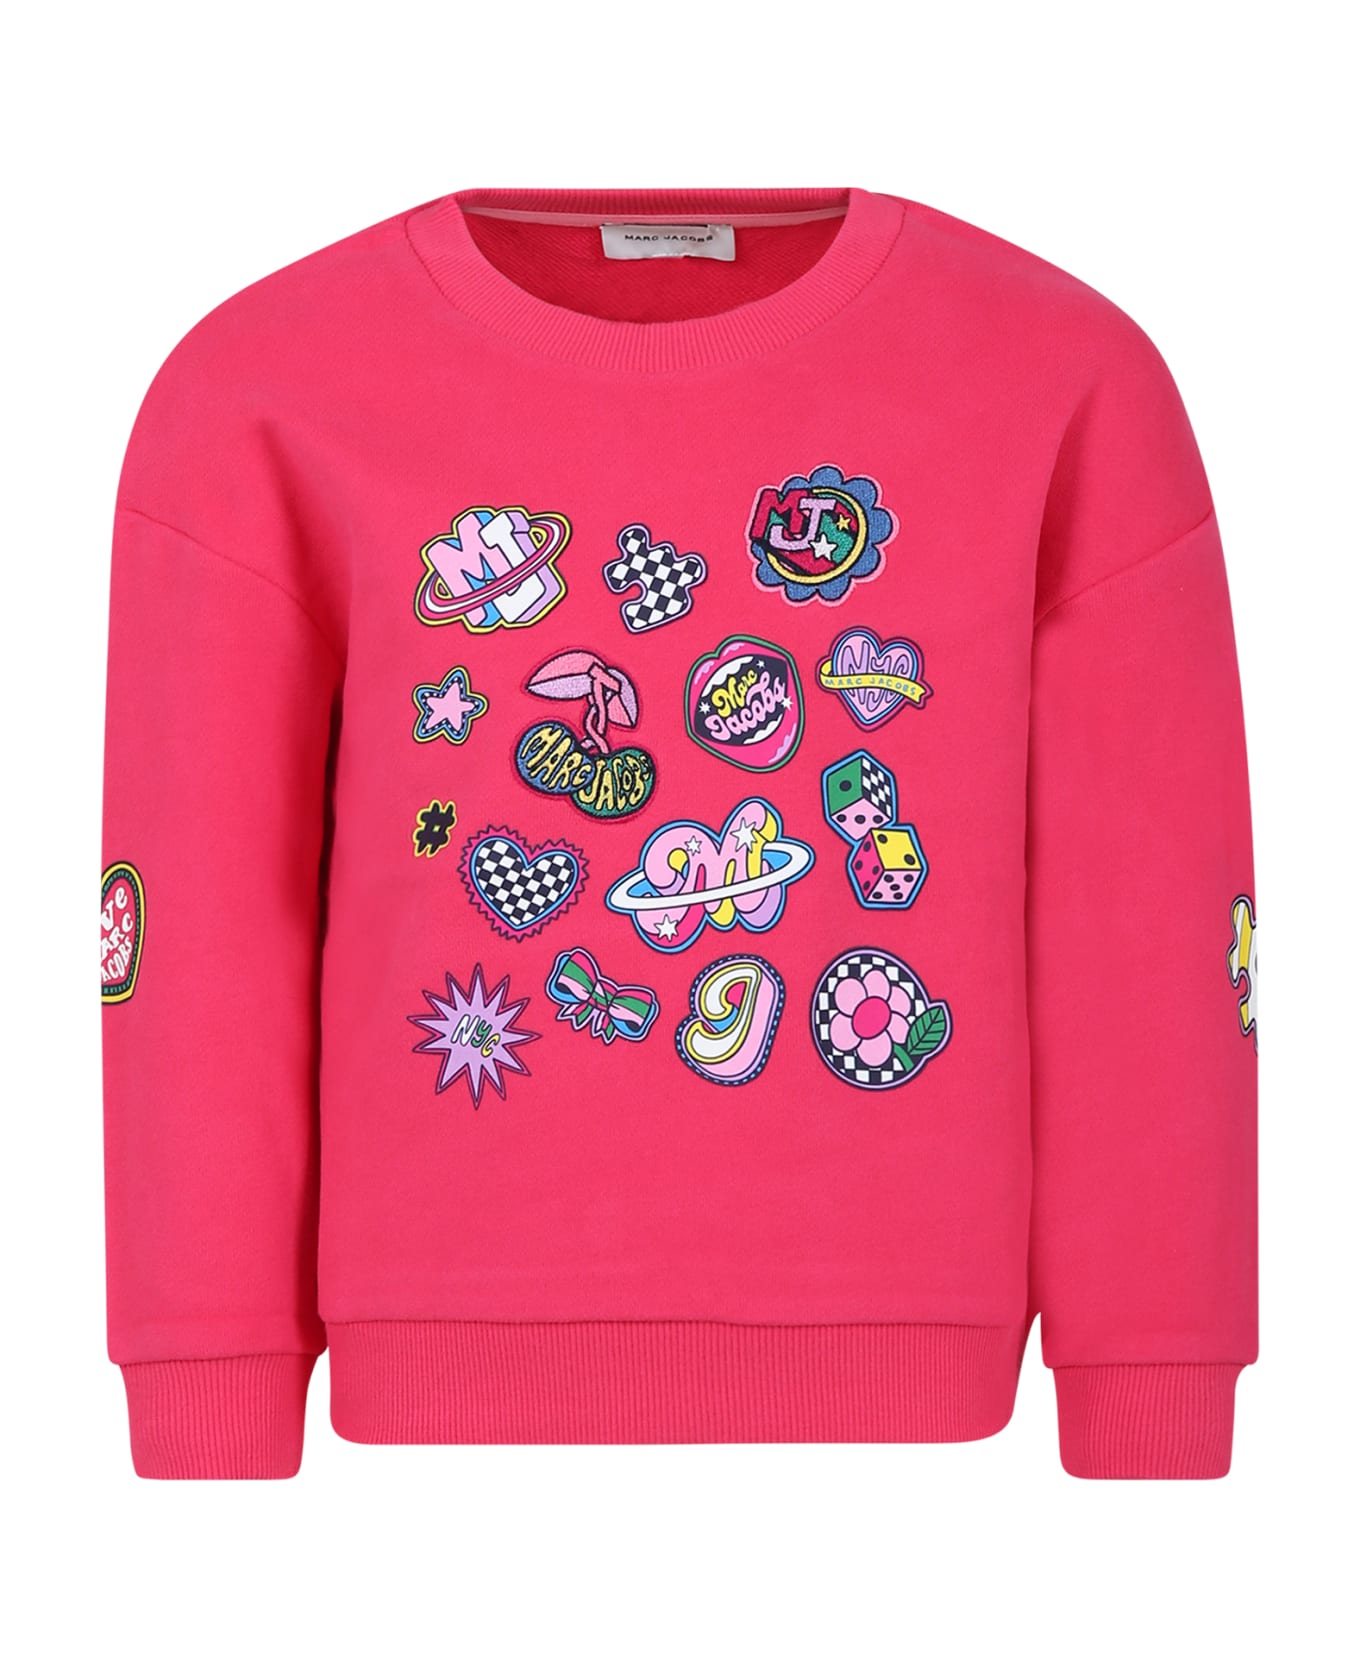 Little Marc Jacobs Fuchsia Sweatshirt For Girl With Logo And Prints - Fucsia